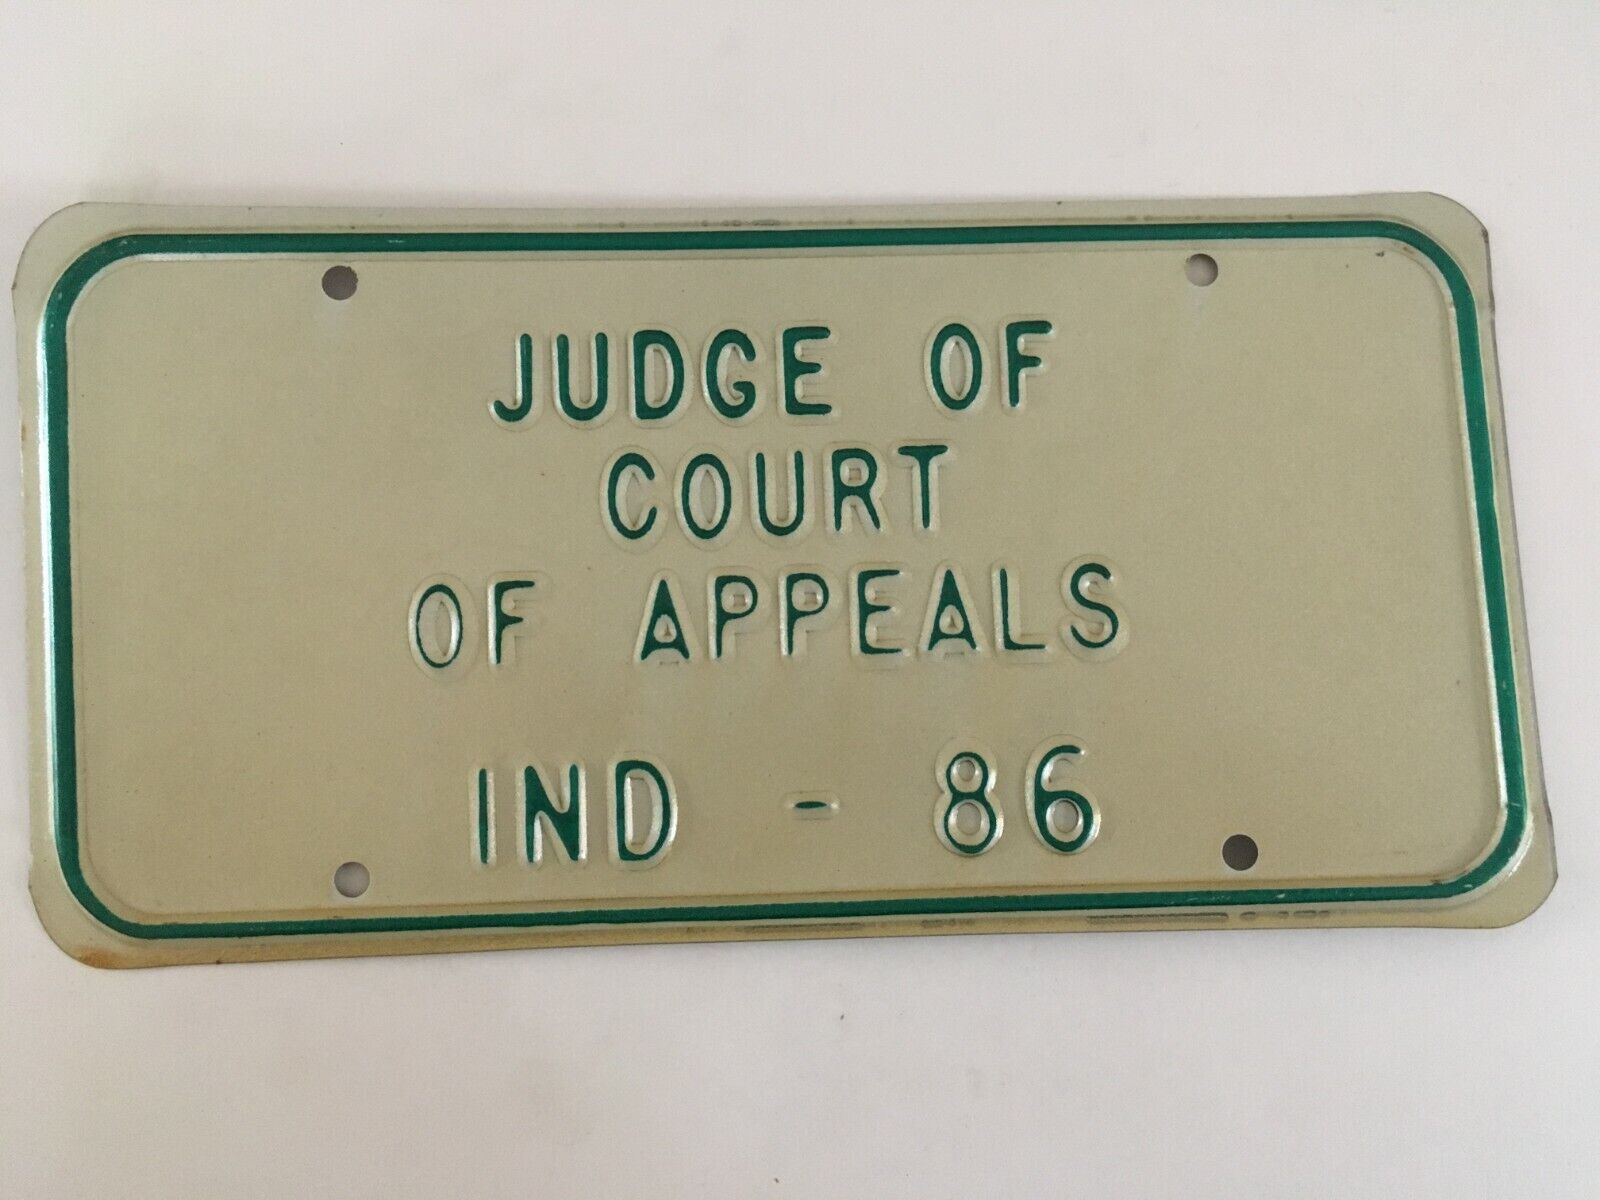 1986 Indiana Court of Appeals License Plate Political Judicial Judge